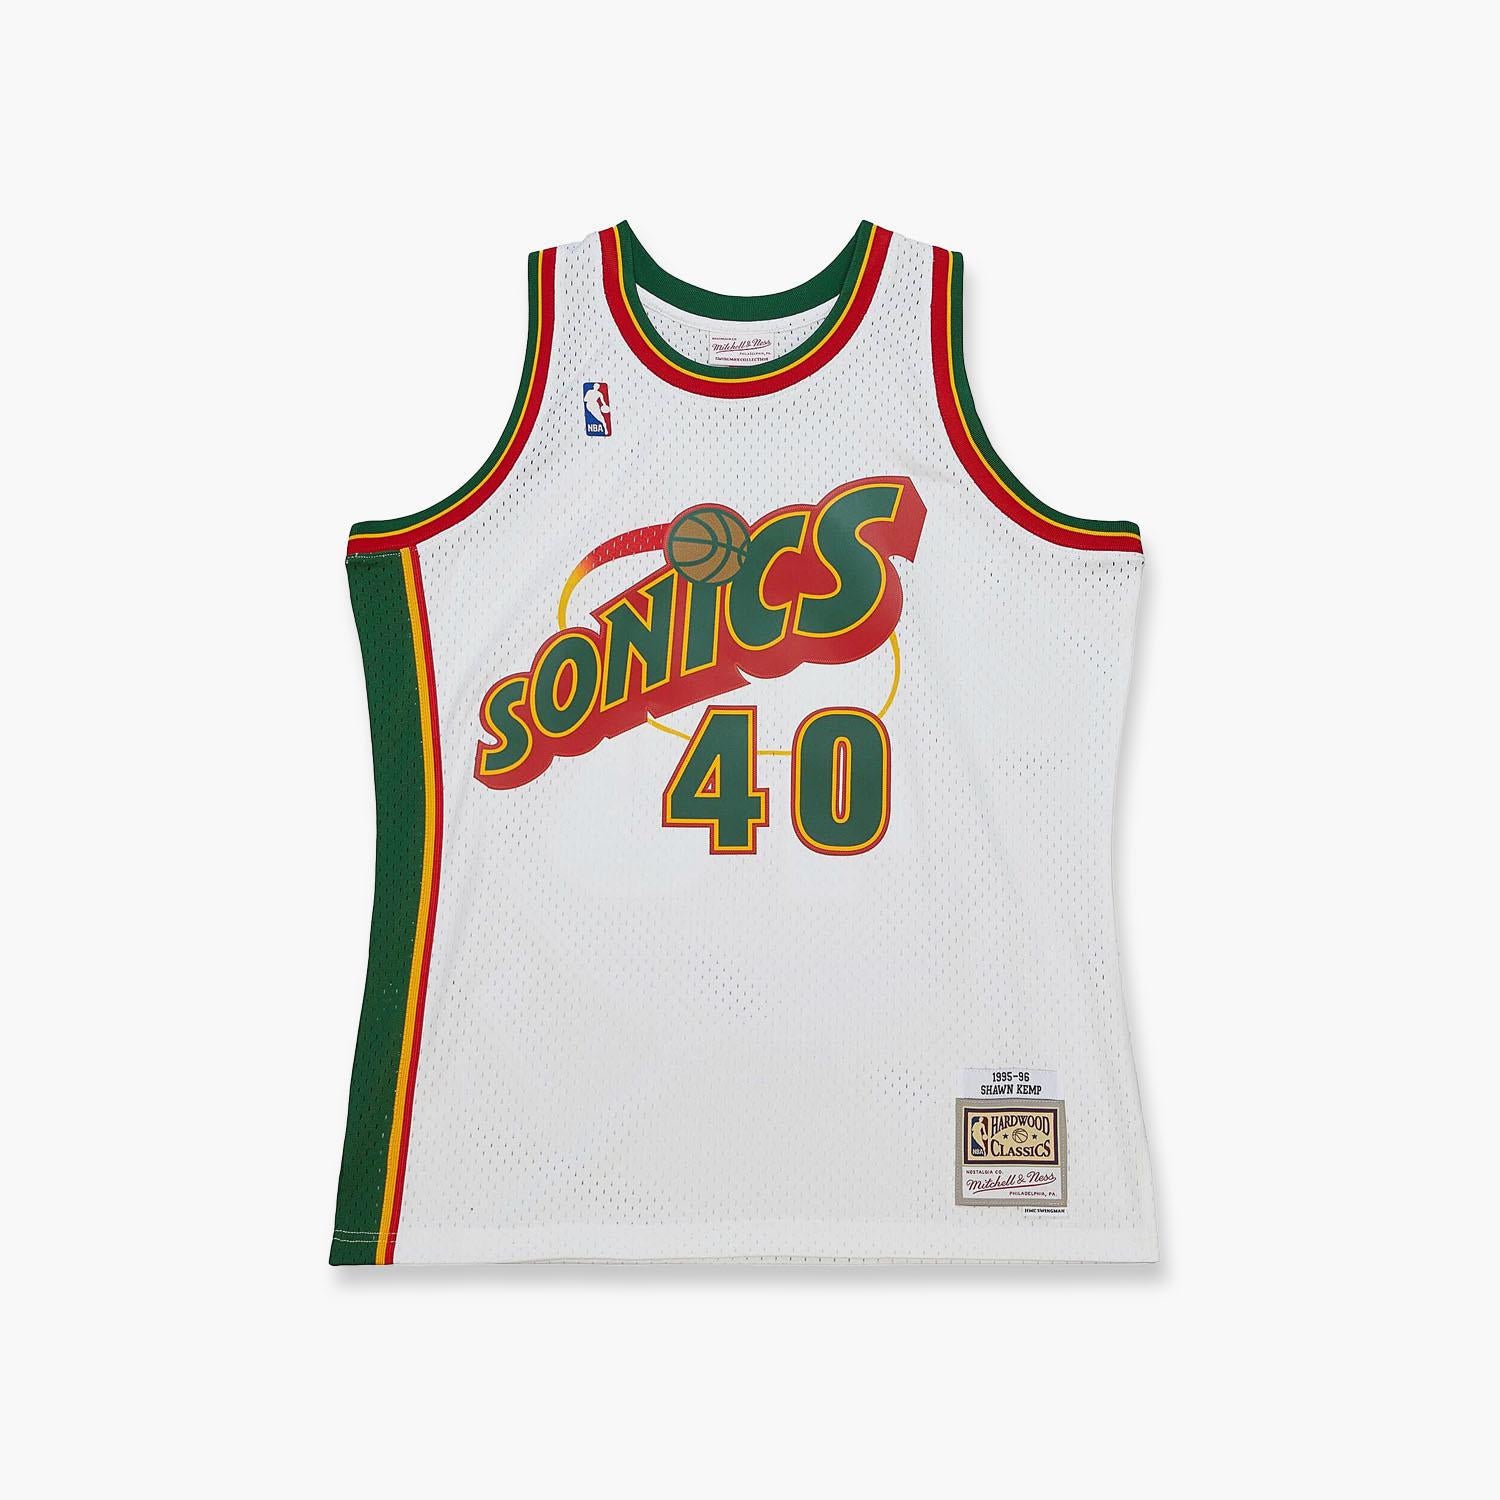 Shawn Kemp Seattle Supersonics Fanatics Authentic Autographed White  Mitchell & Ness 1996 NBA All-Star Authentic Jersey